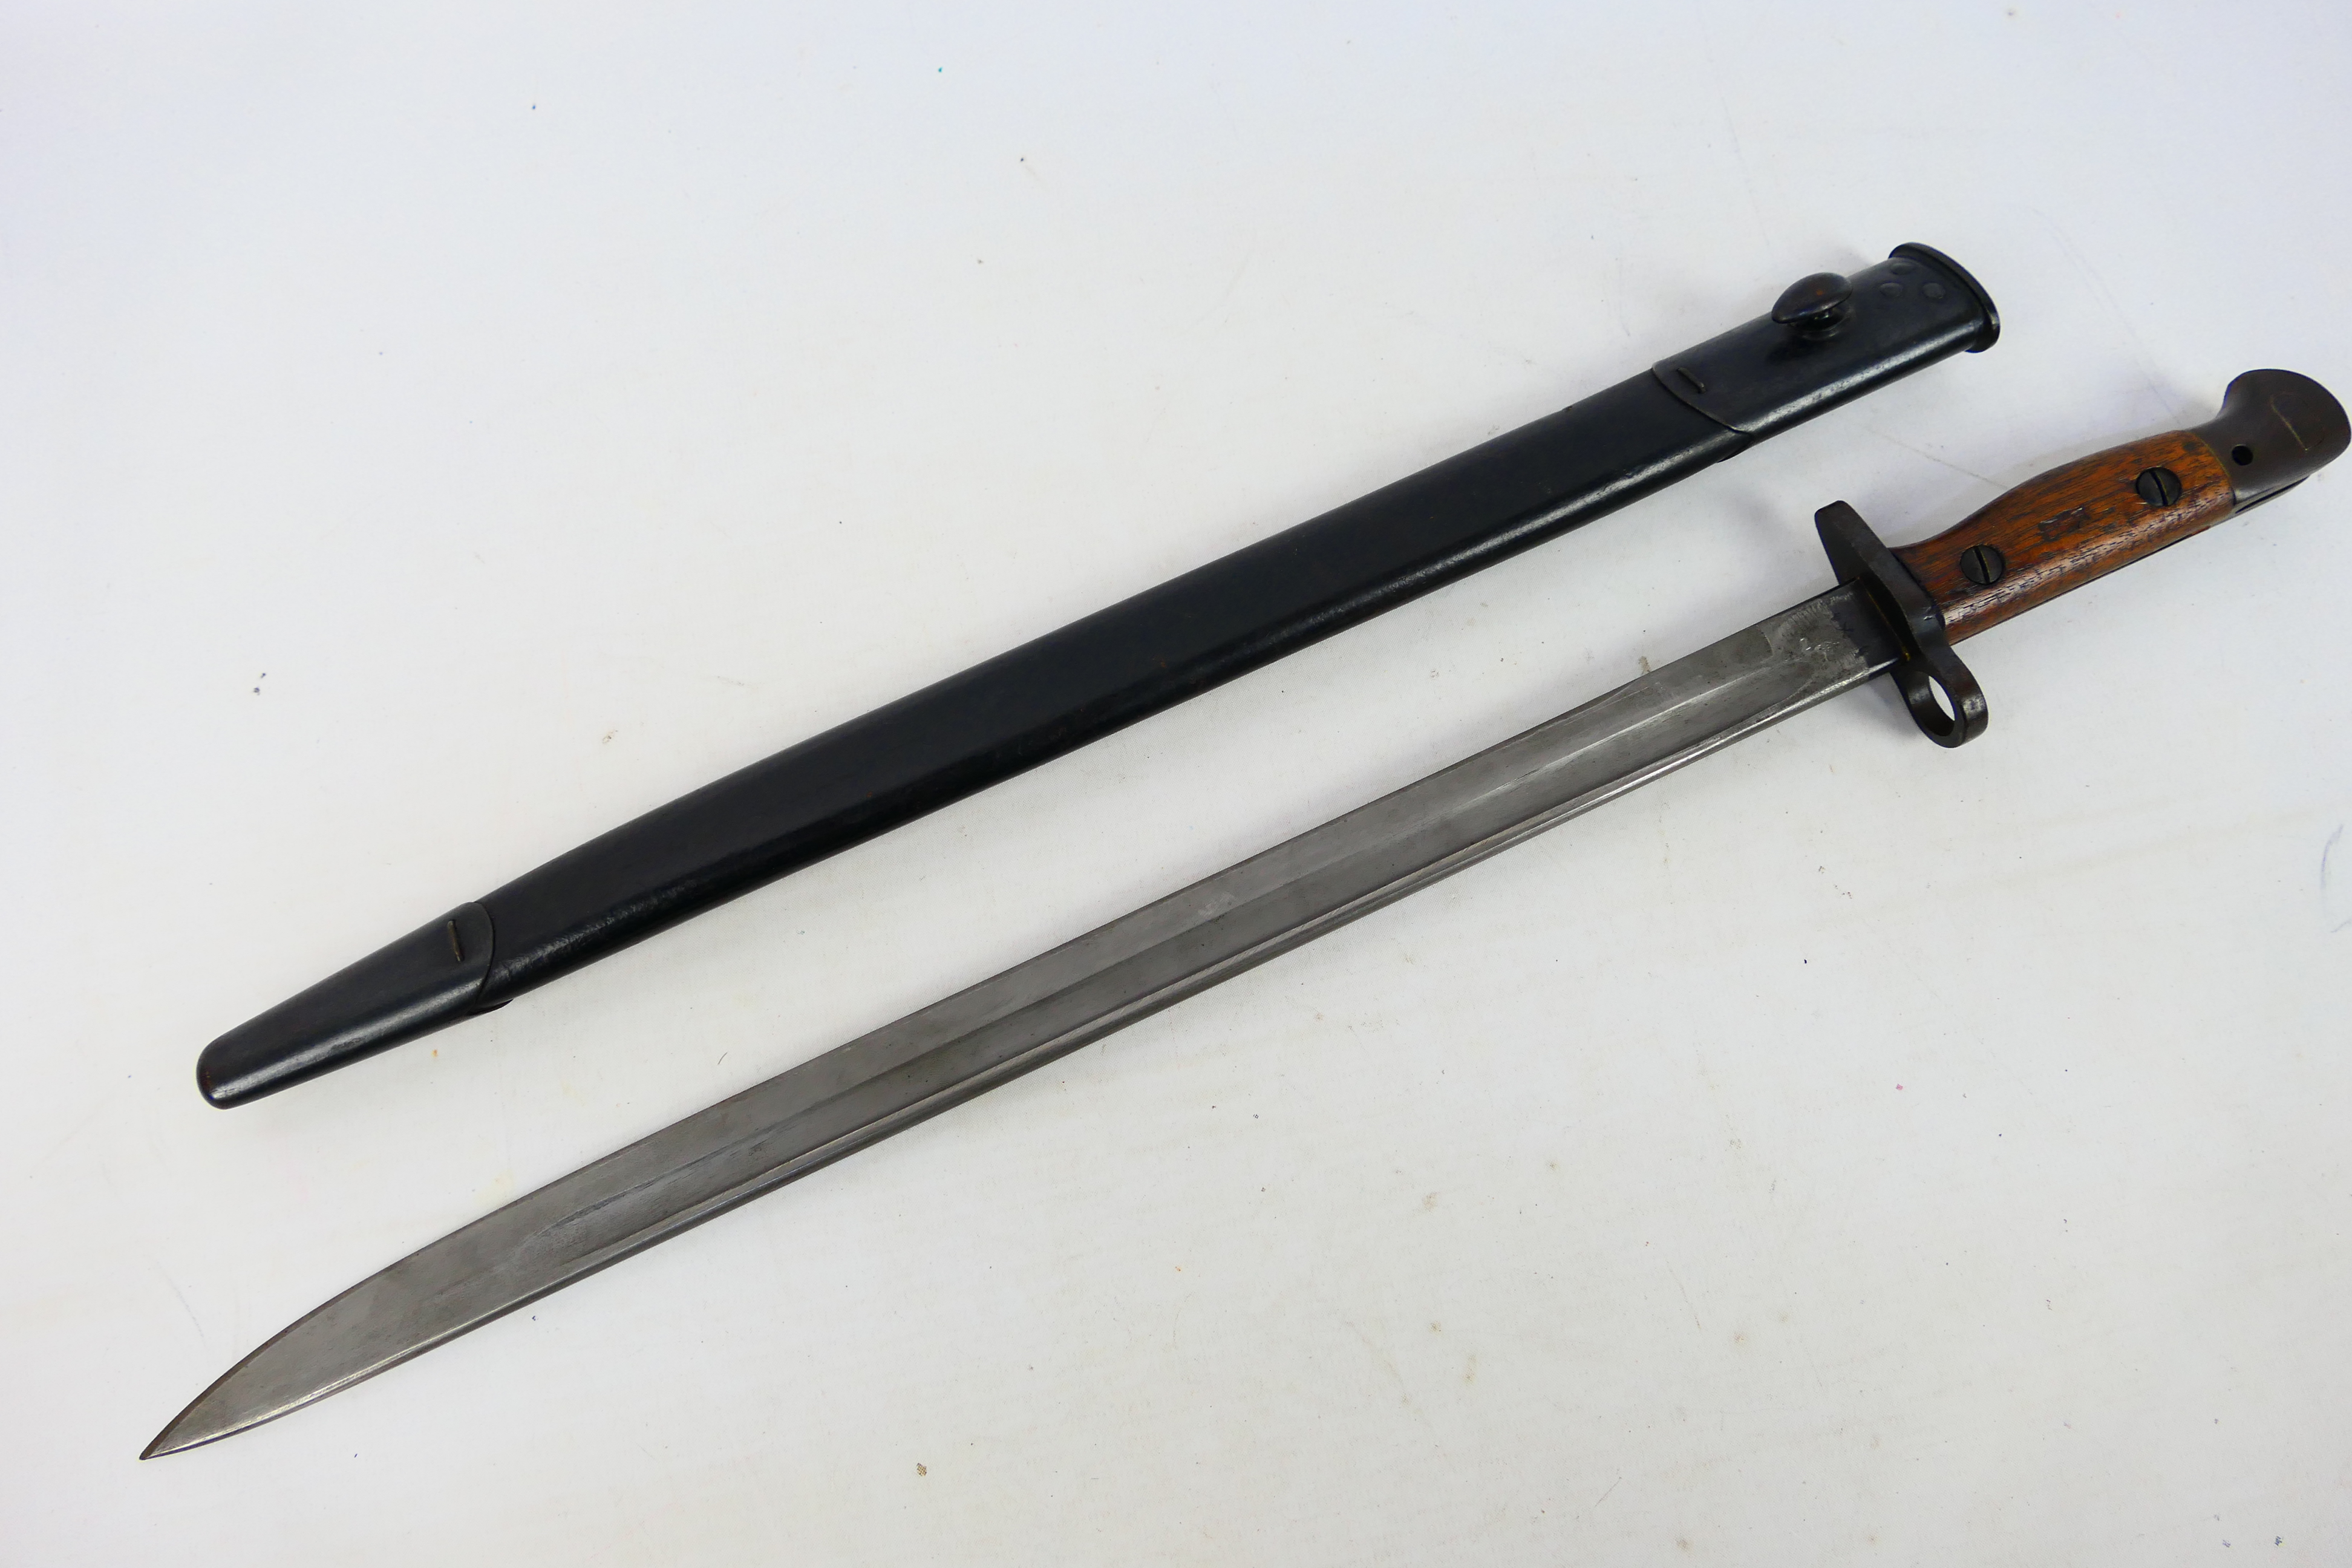 British military sword bayonet, pattern 1907, SMLE, marked Wilkinson 1907 to the ricasso,